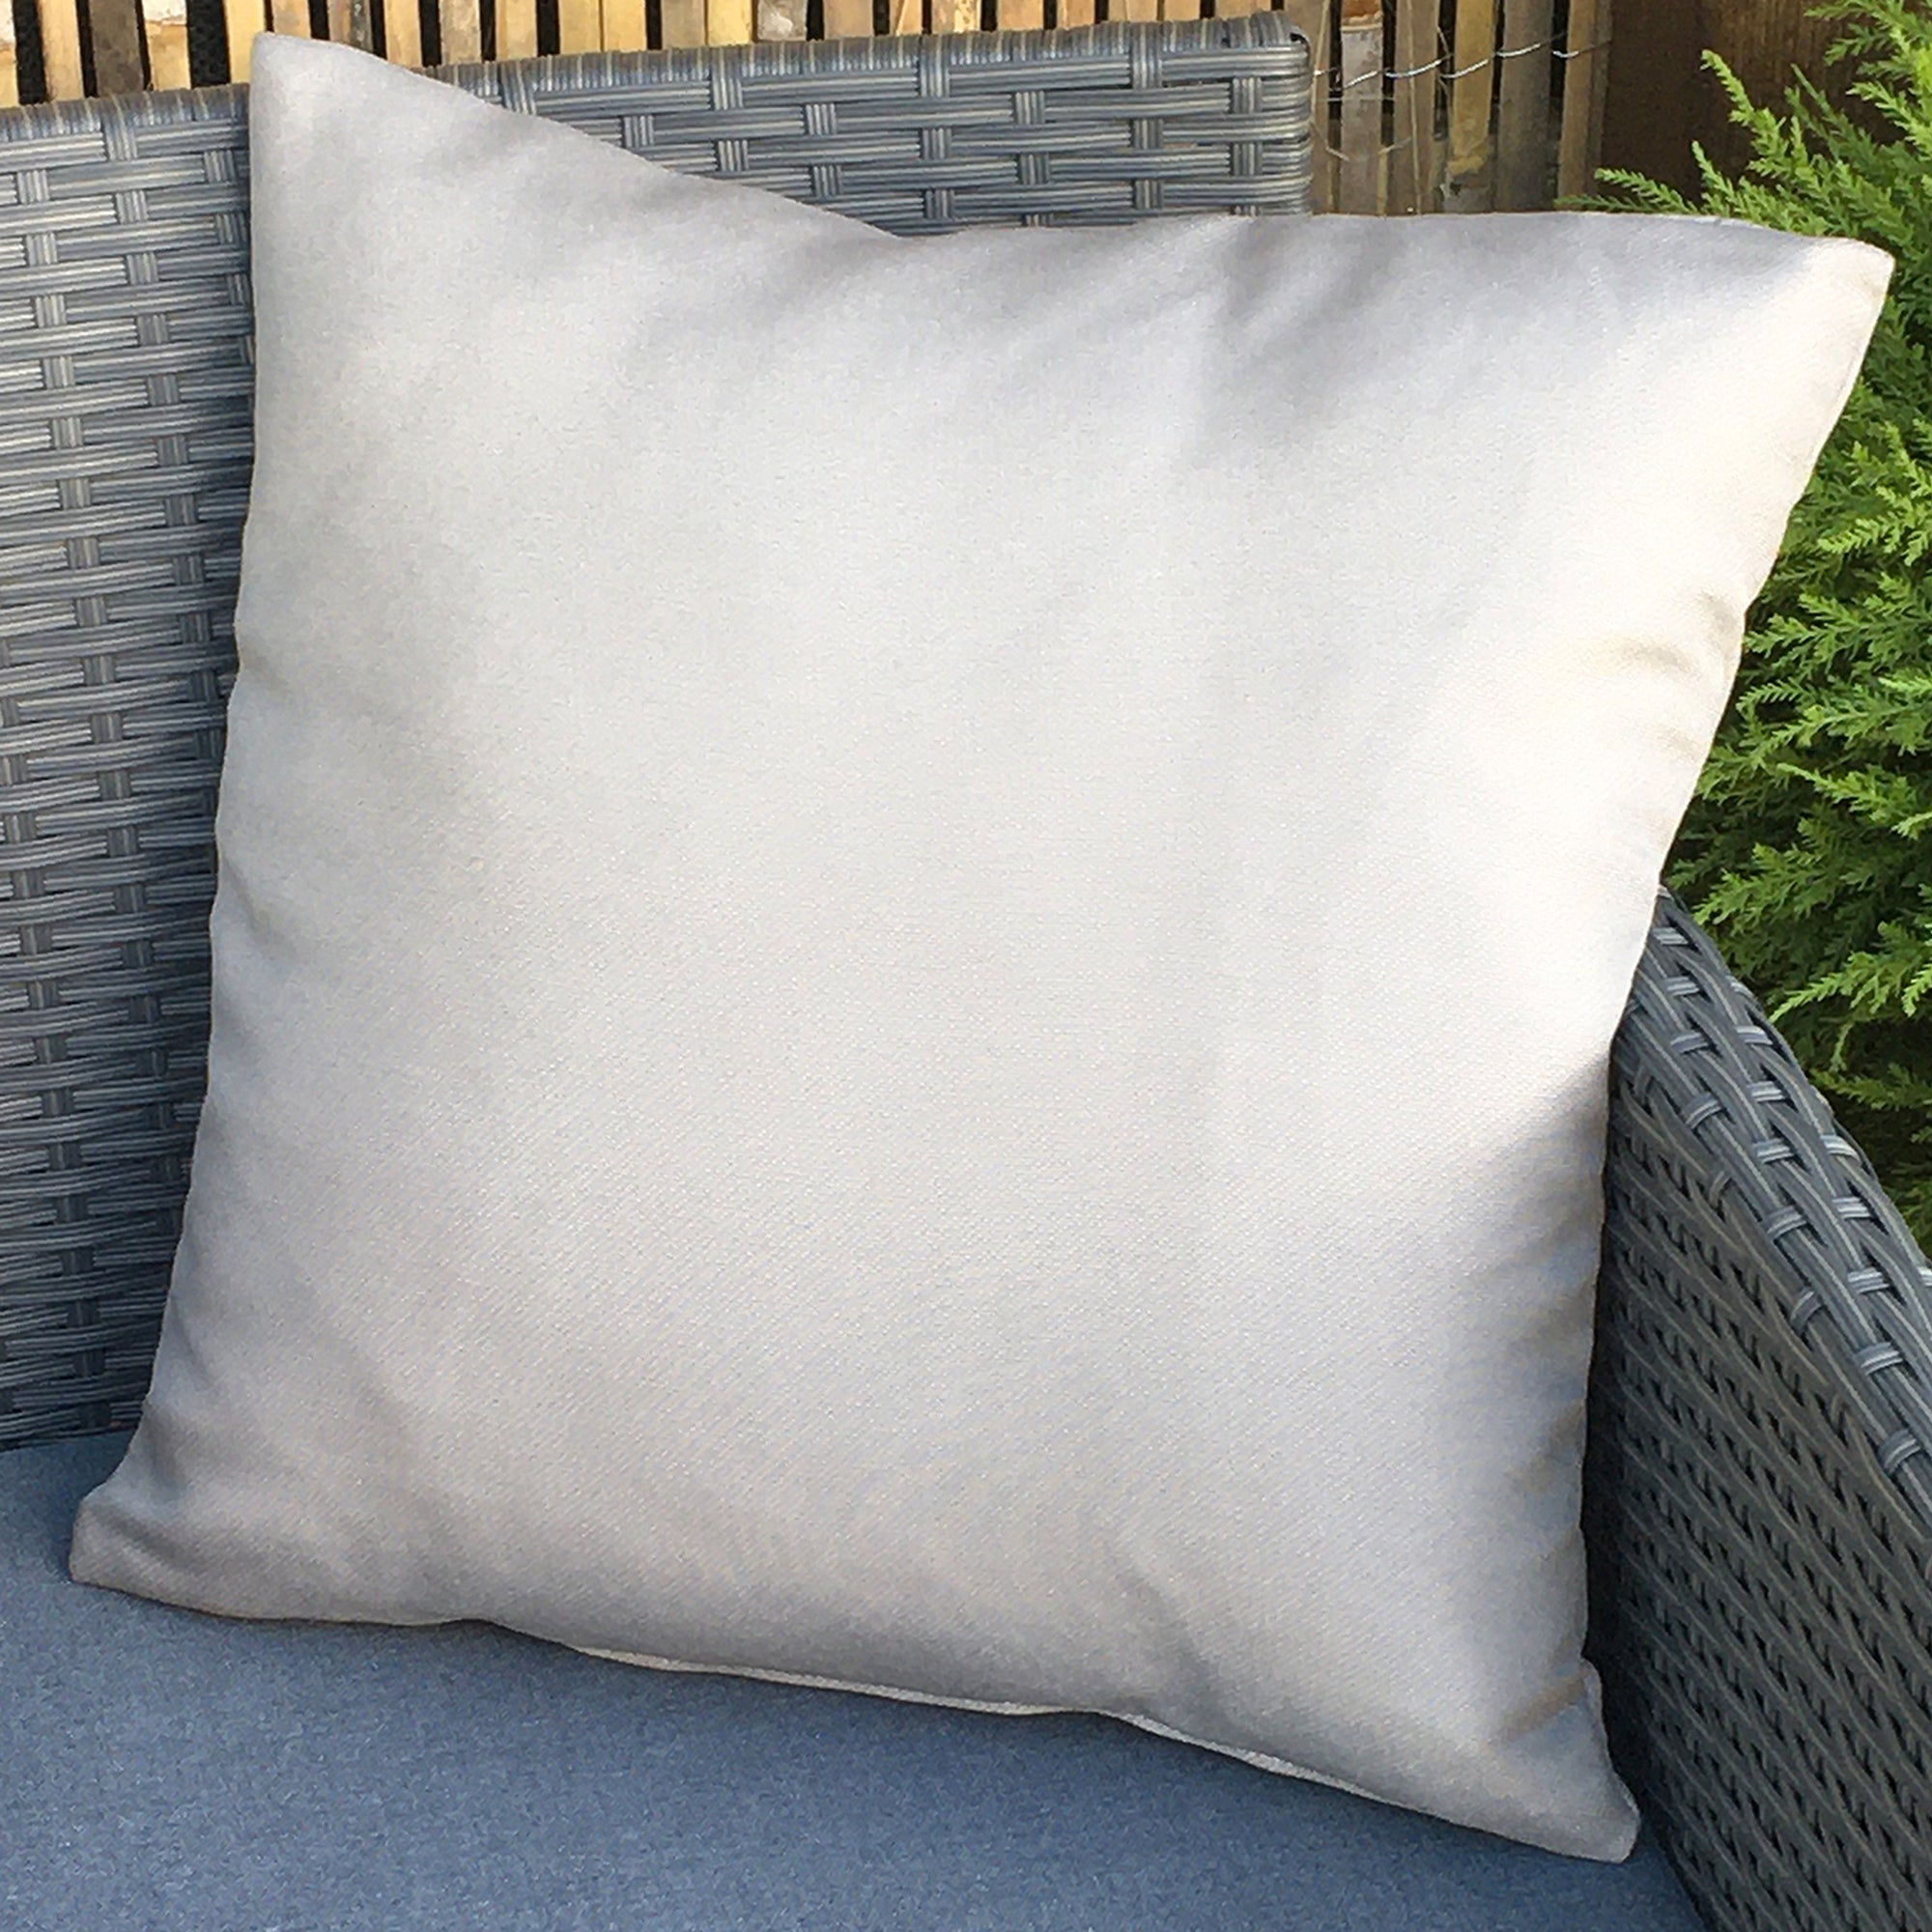 Set of 2 Plain Scatter Outdoor Cushions